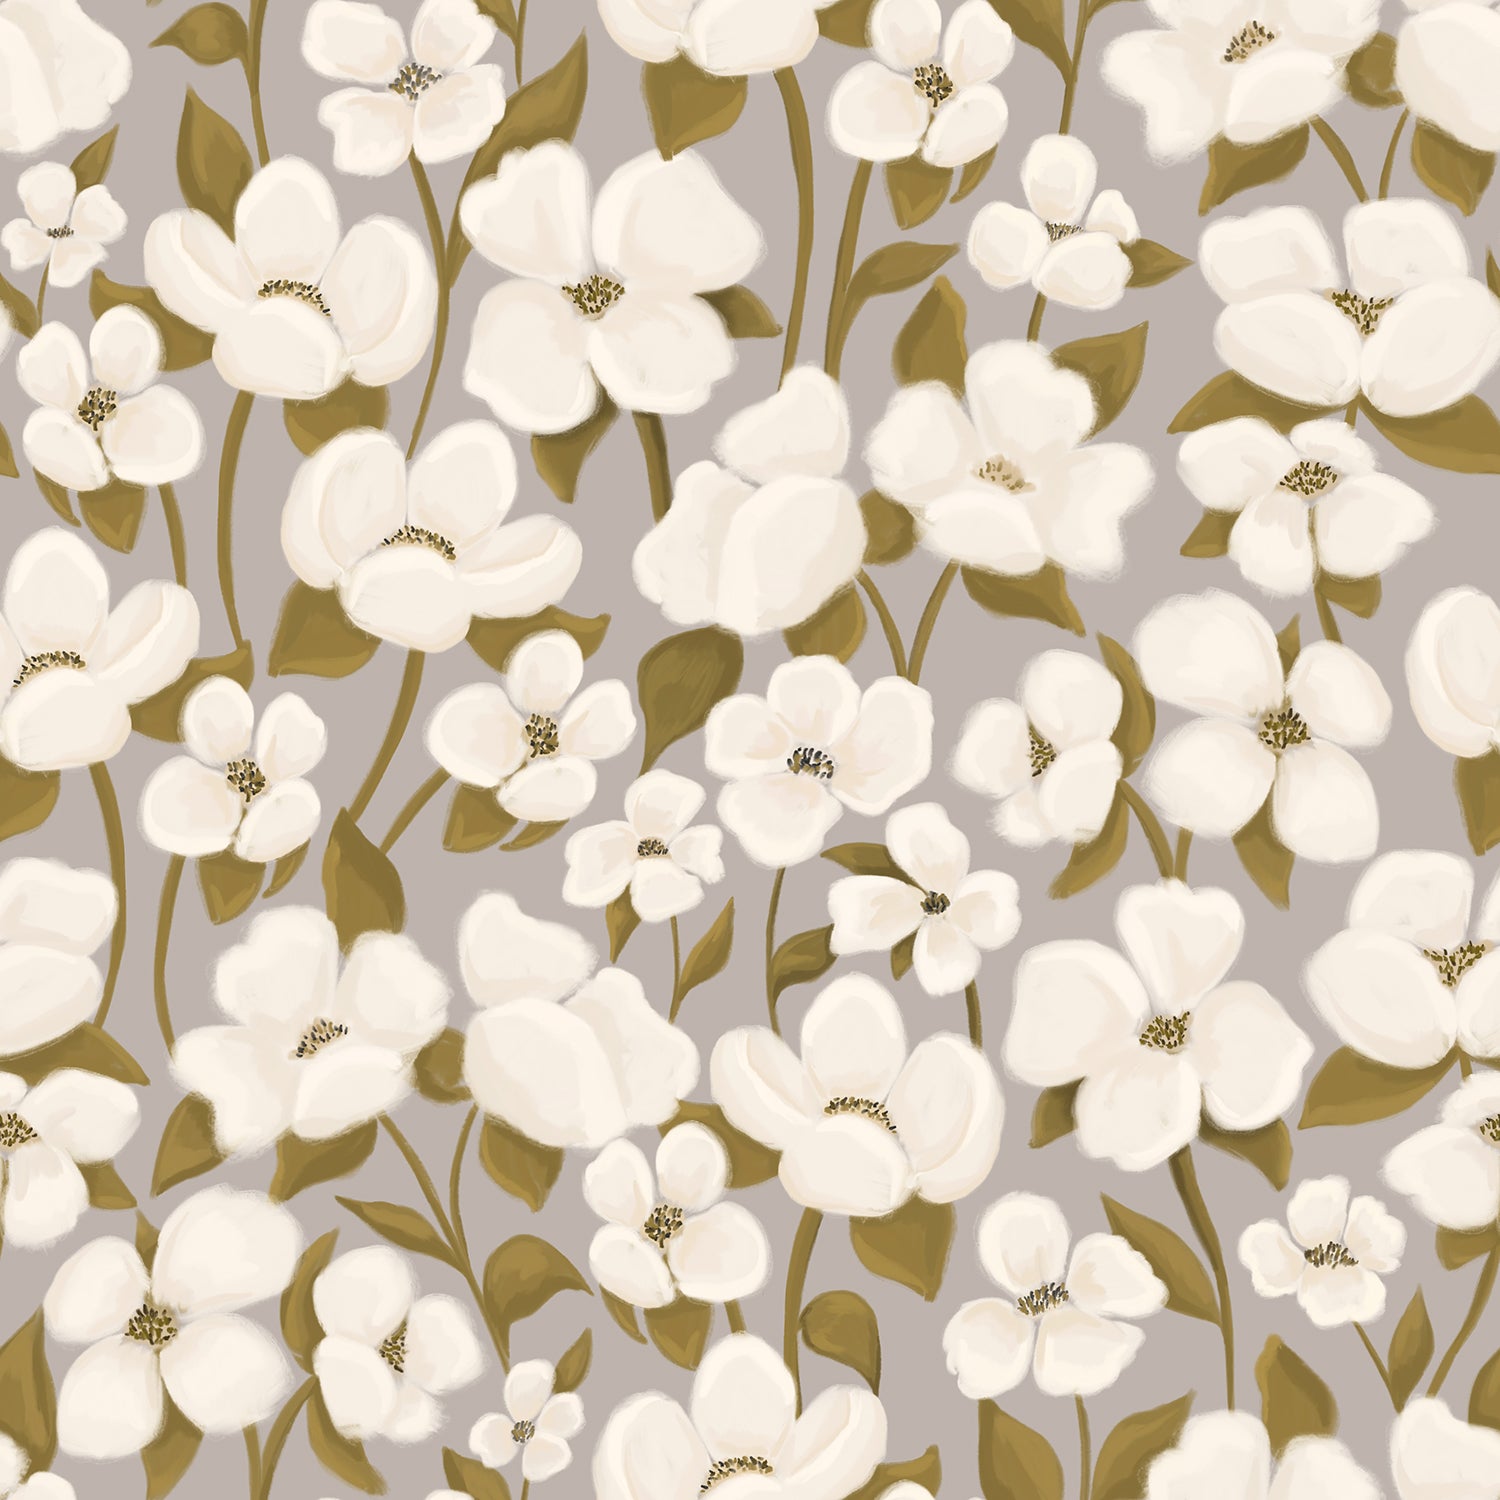 Close-up view of the White Fleur Wallpaper, displaying a detailed pattern of white flowers and green leaves on an olive background, evoking a fresh and natural aesthetic.